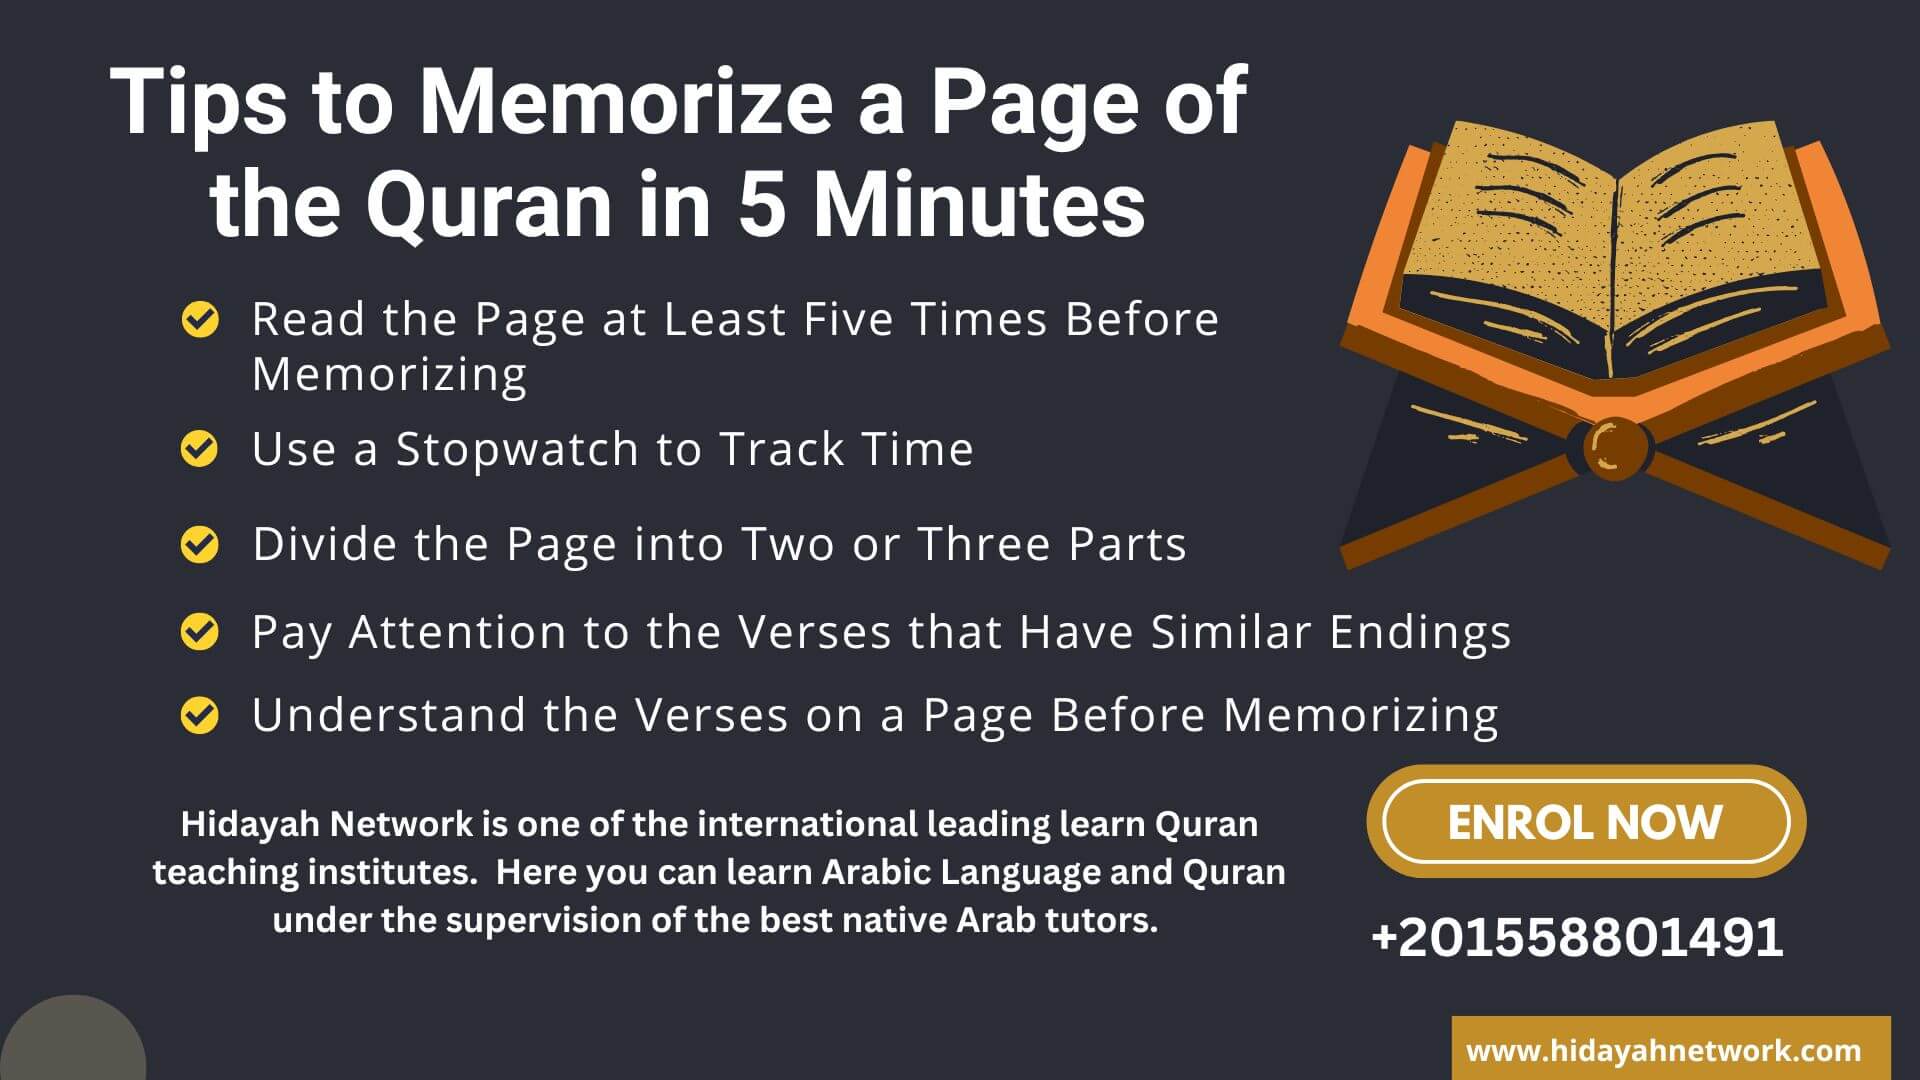 Memorize a Page of Quran in 5 Minutes